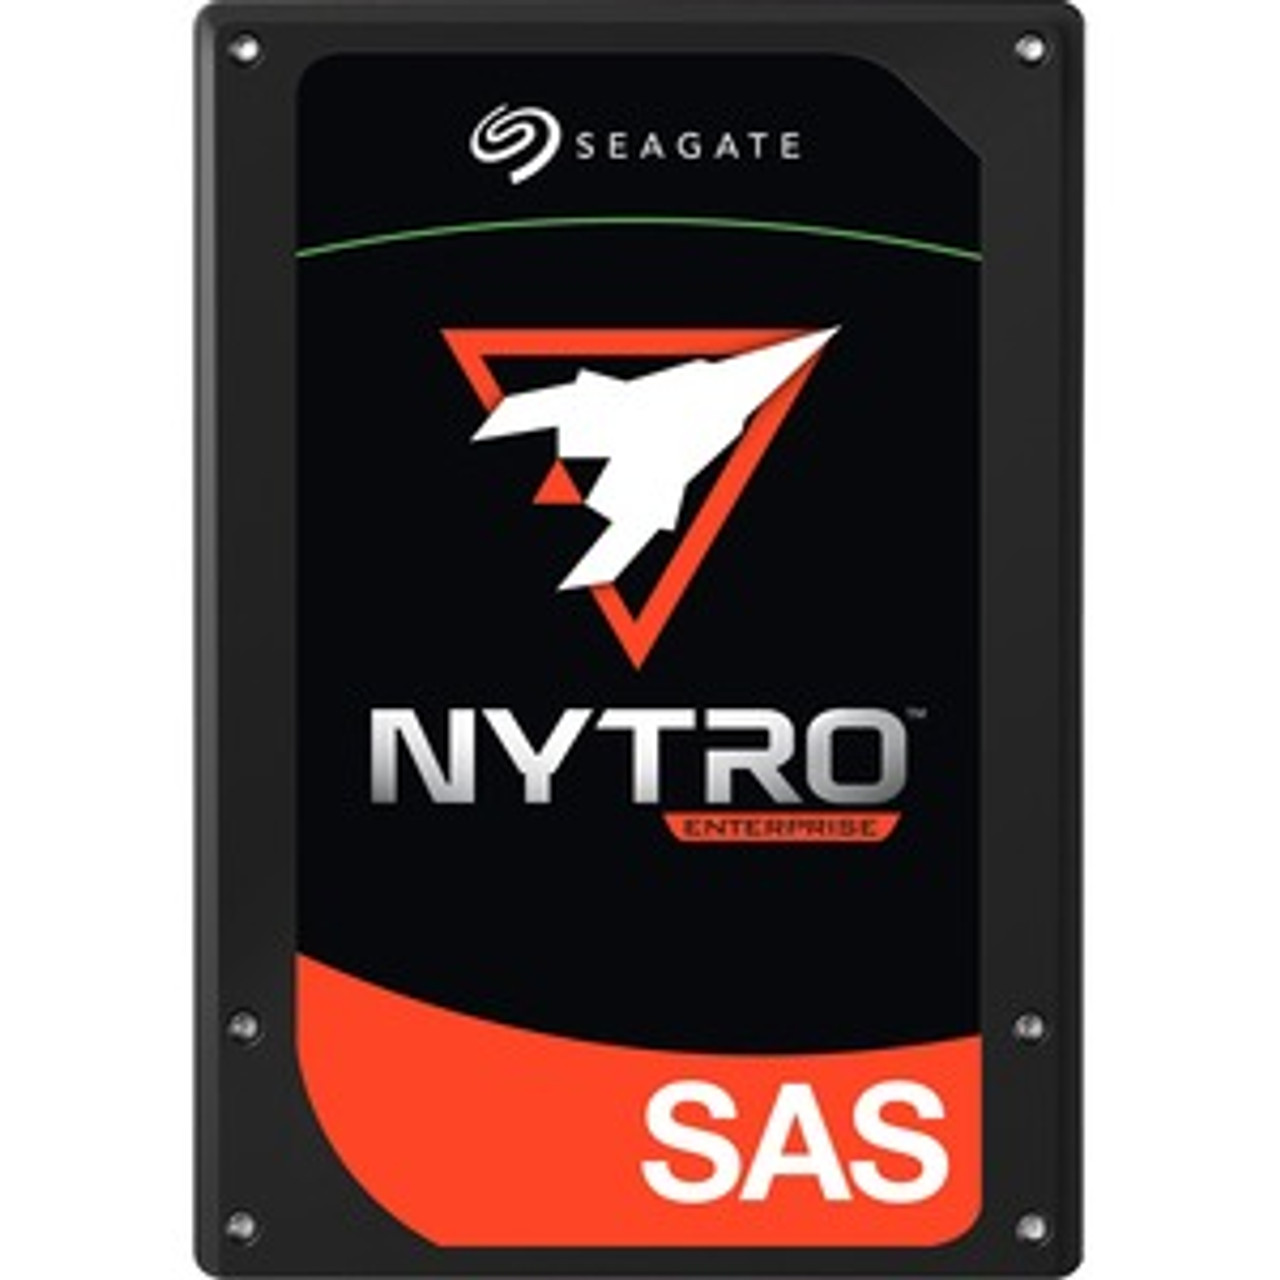 XS7680SE70103-10PK Seagate Nytro 3330 7.68TB eTLC SAS 12Gbps Scaled Endurance 2.5-inch Internal Solid State Drive (SSD) (10-Pack)